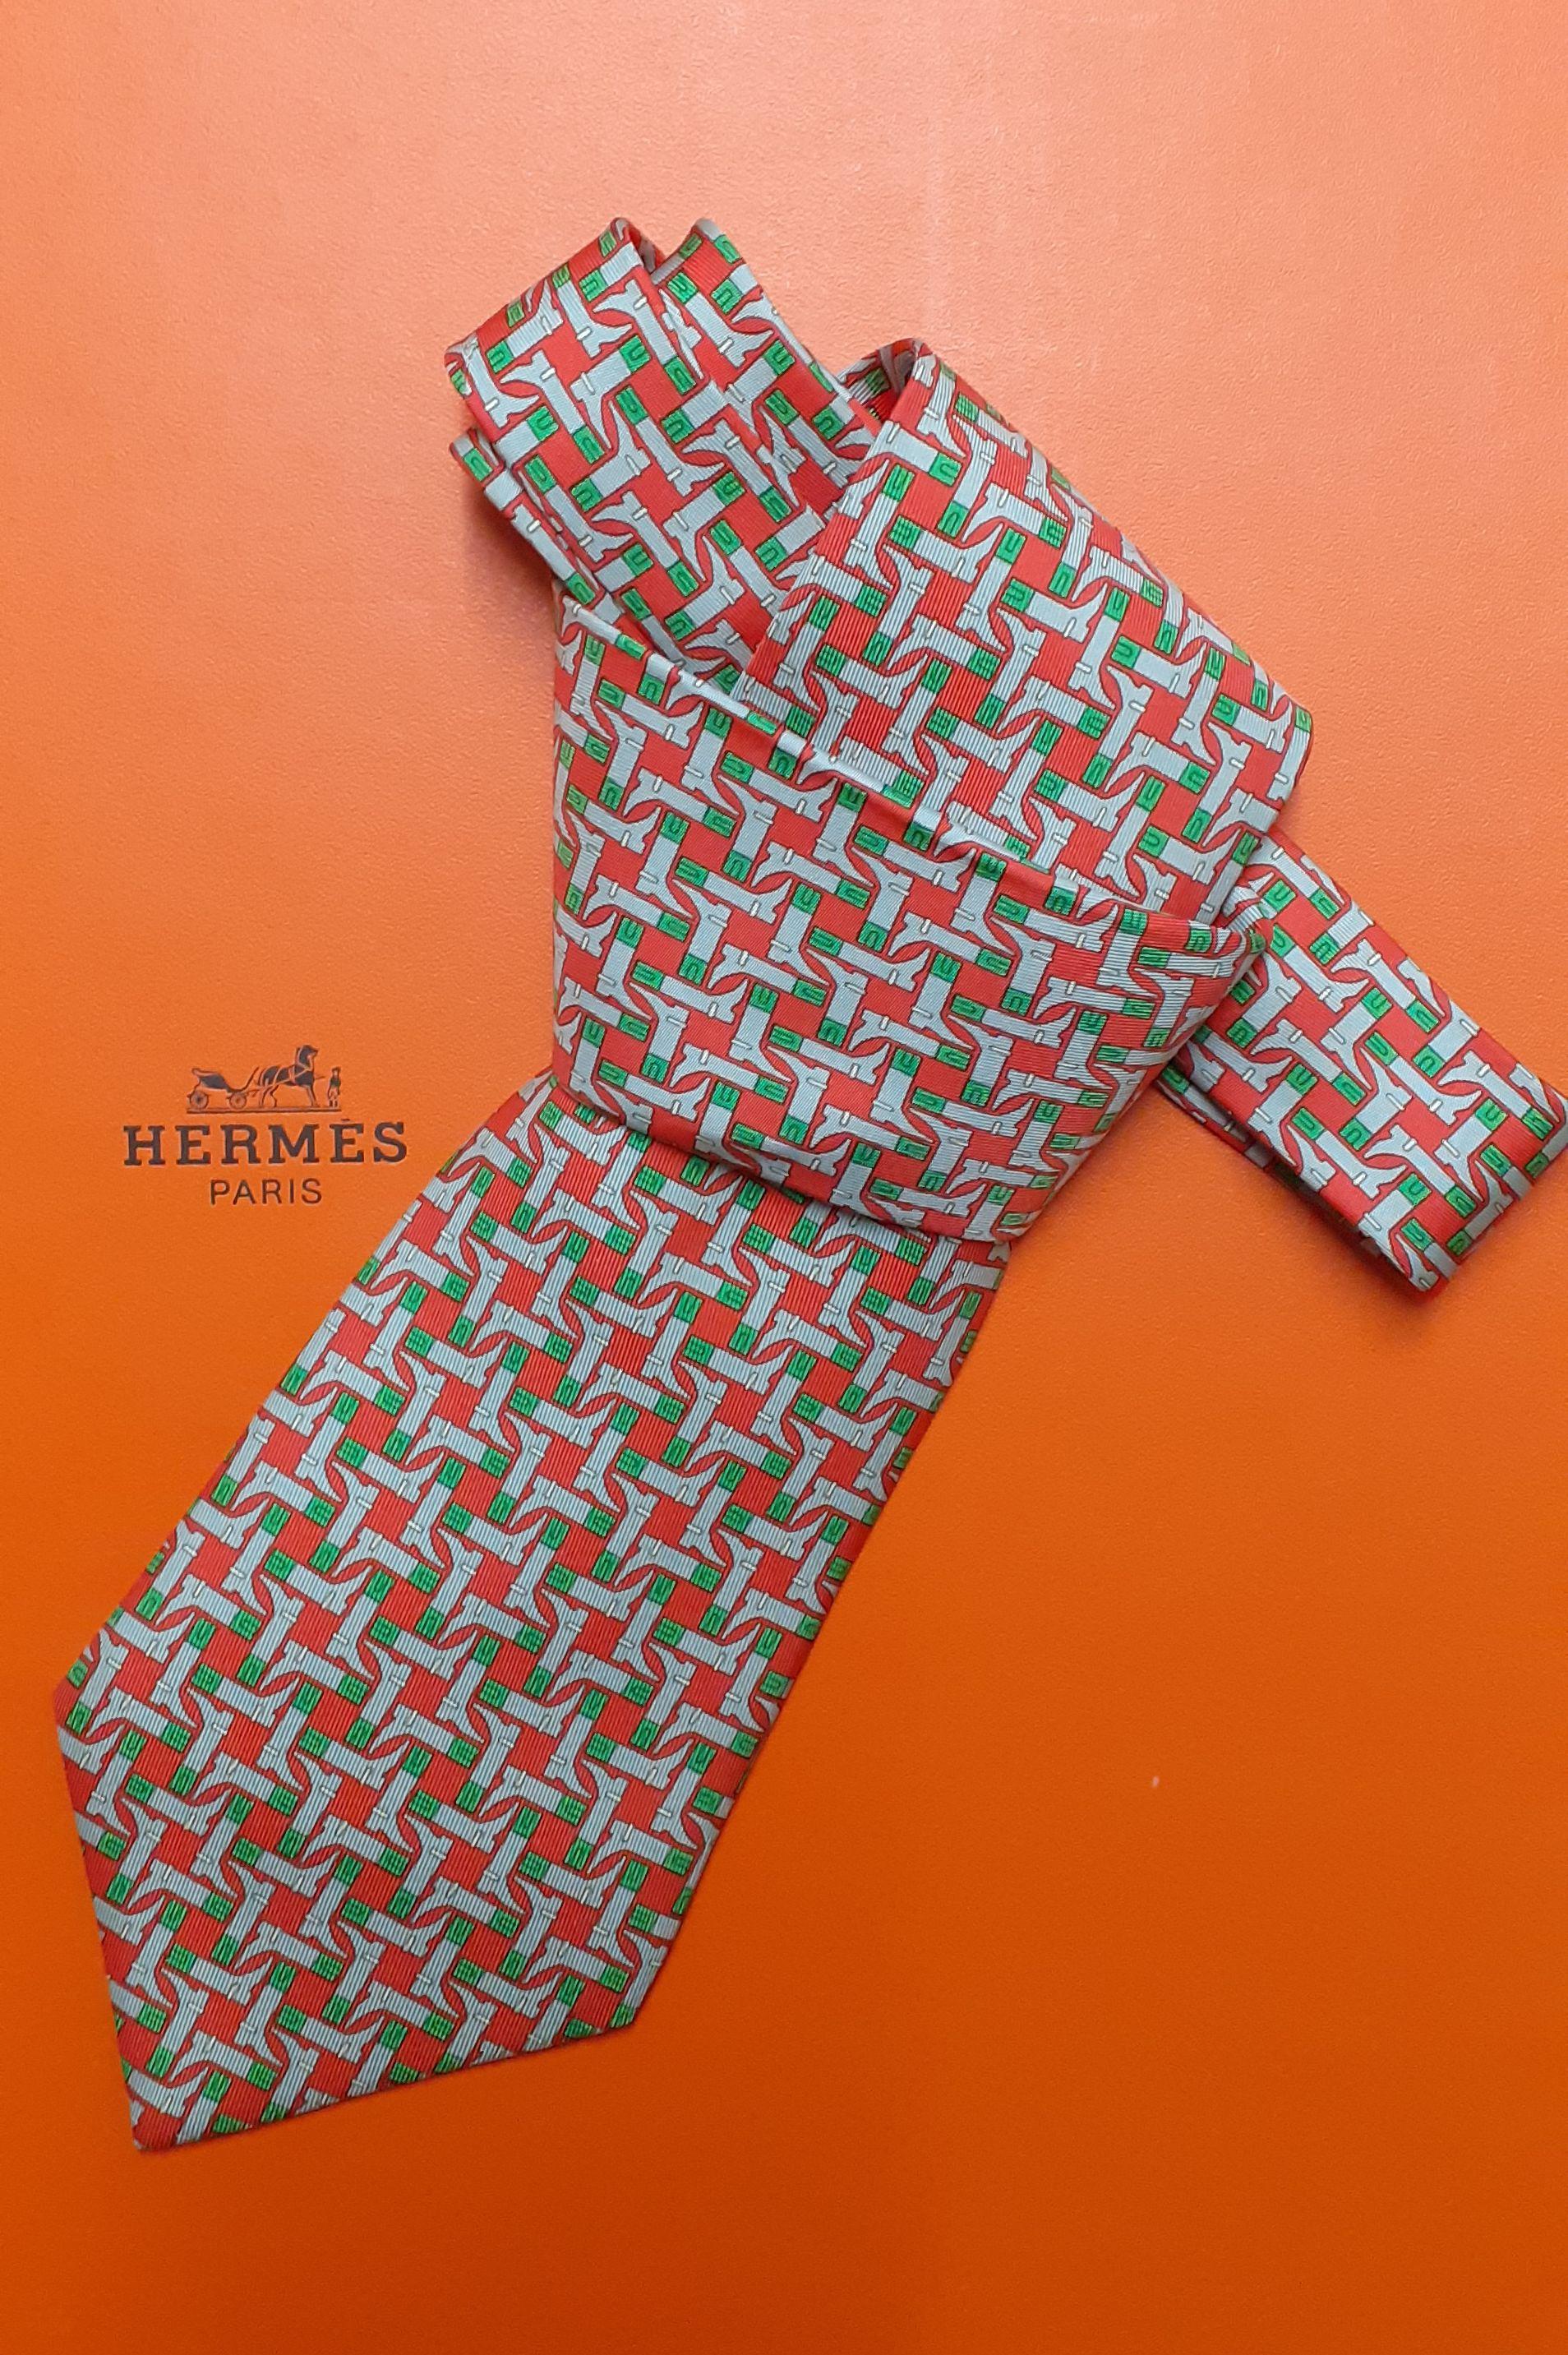 Rare Authentic Hermès Tie

Made especially by Hermès for Italy, to celebrate 150 years of Italian unification

Print: Boots, little nod to the shape of Italy

Made in France

Made of 100% Silk

Colorways: Italian's flag colors Green, Grey and White,